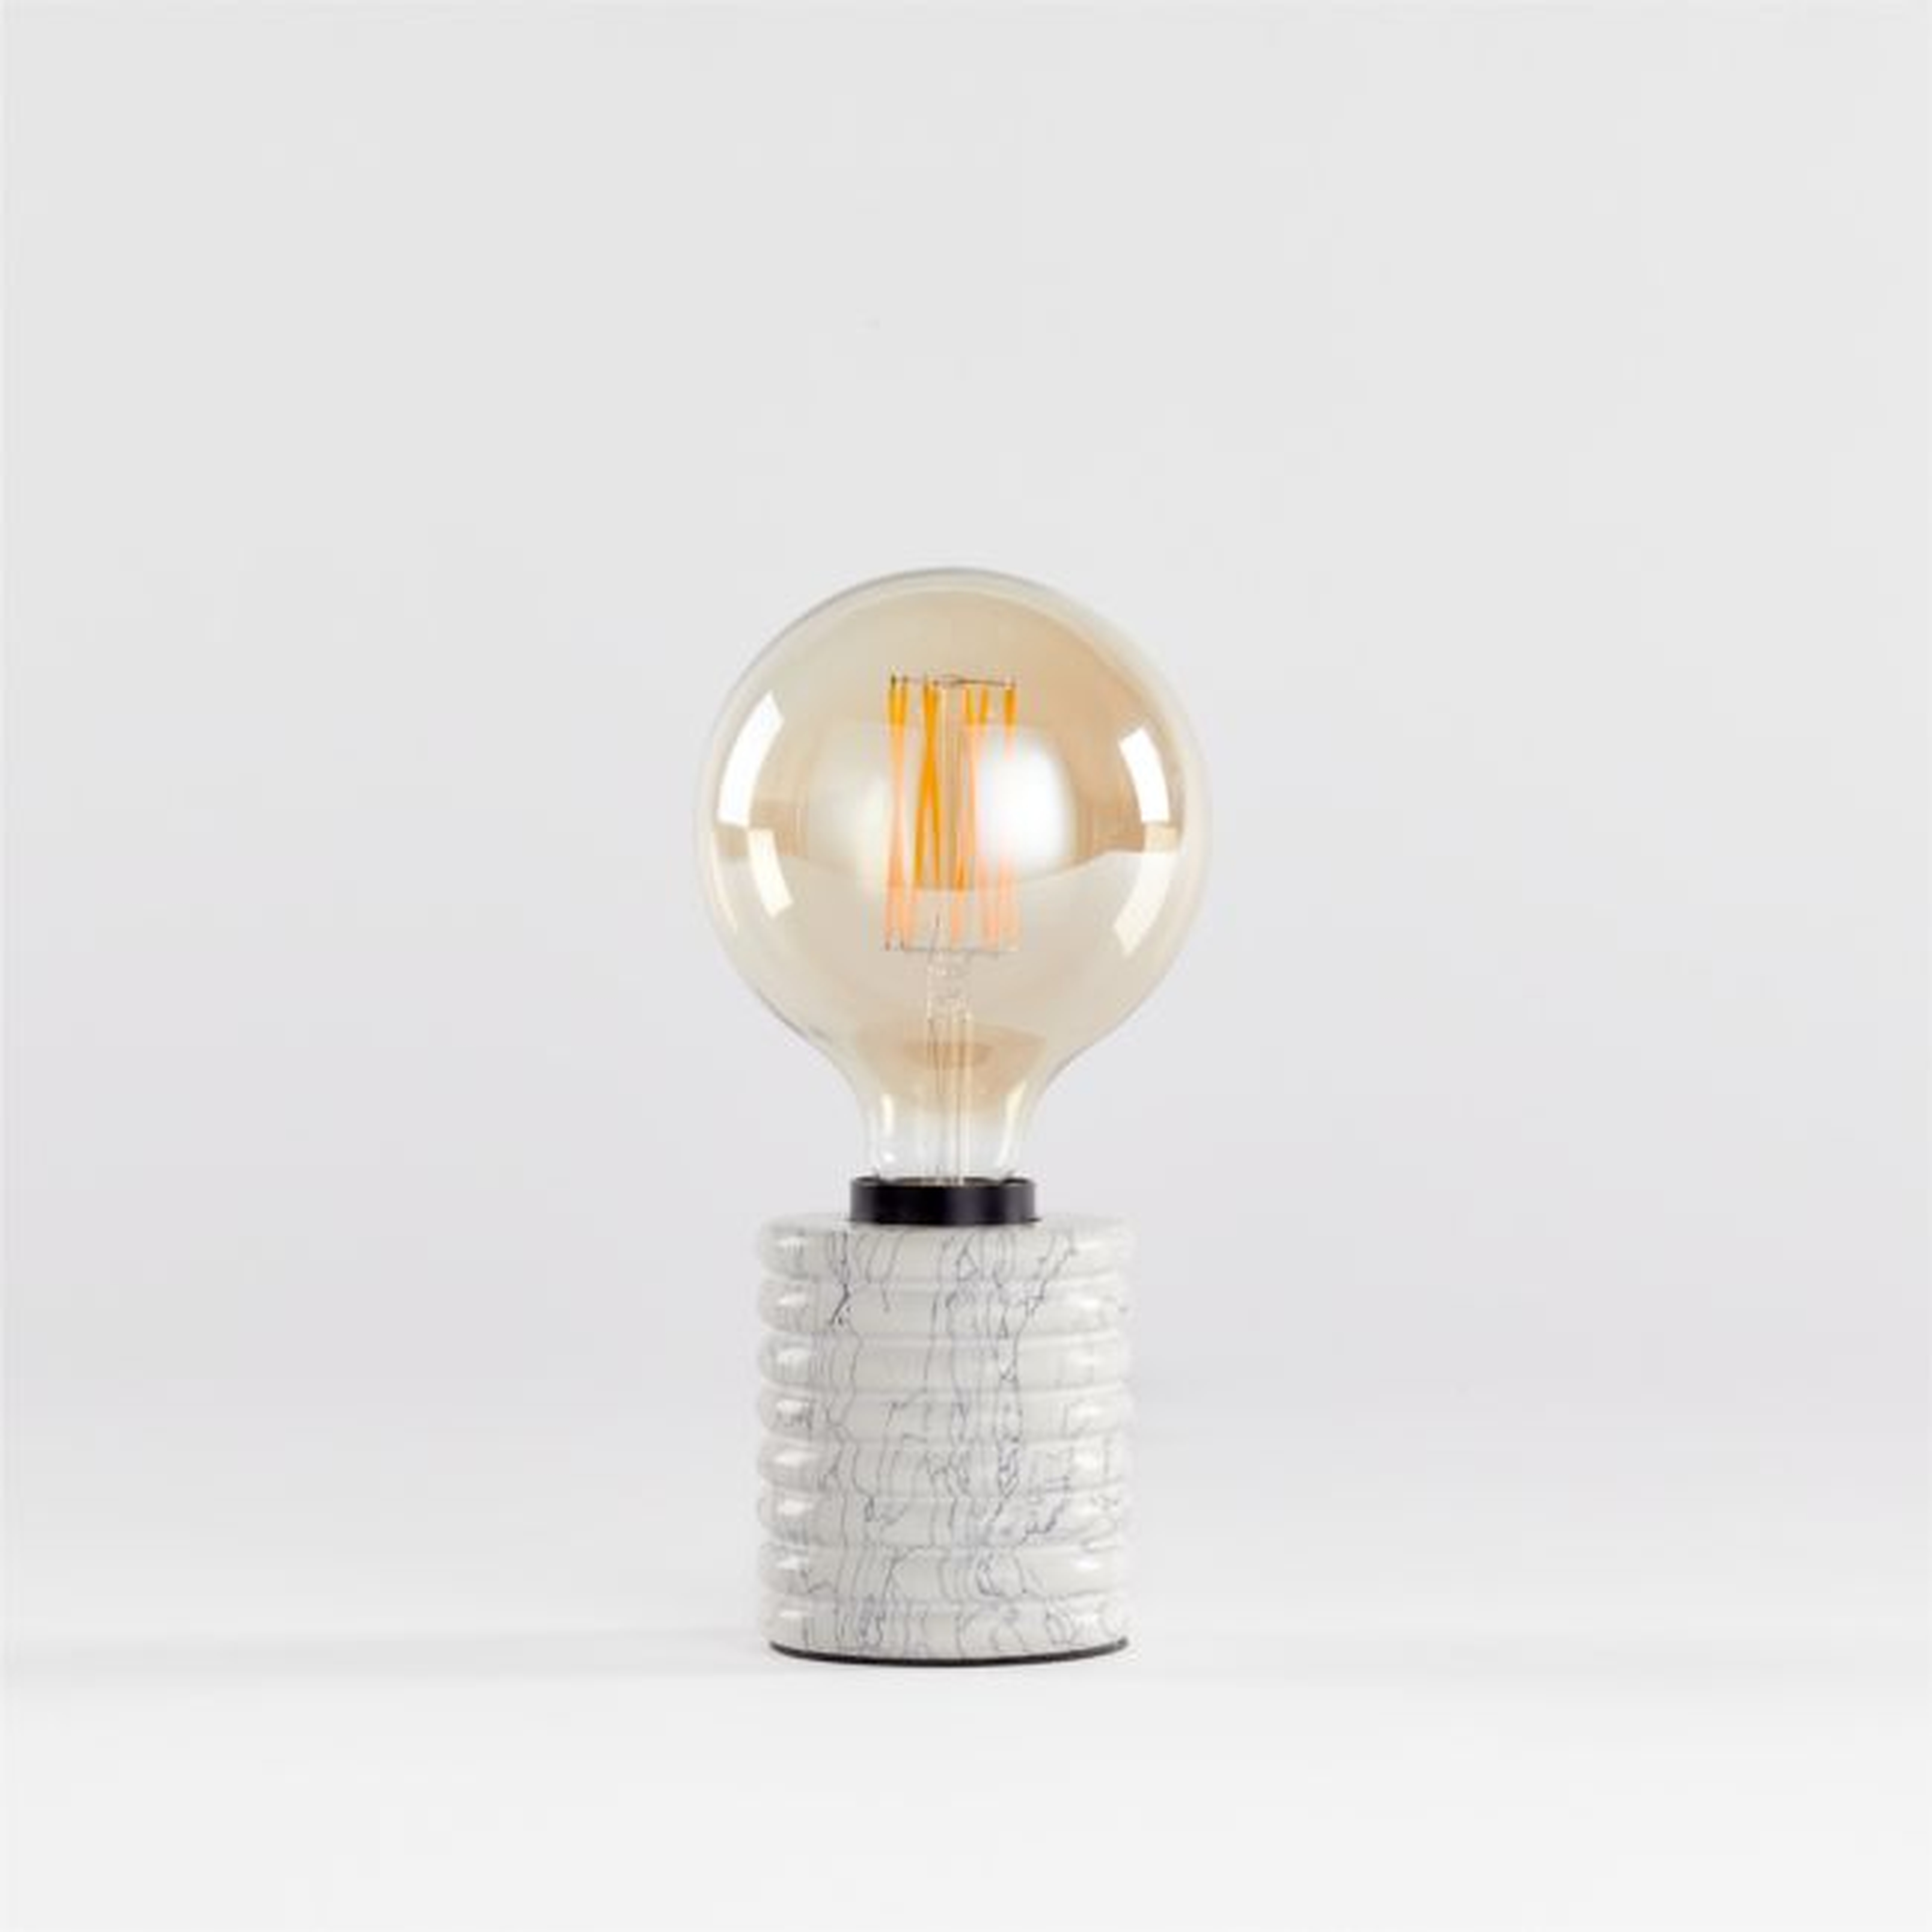 Lucian Exposed Bulb Table Lamp - Crate and Barrel